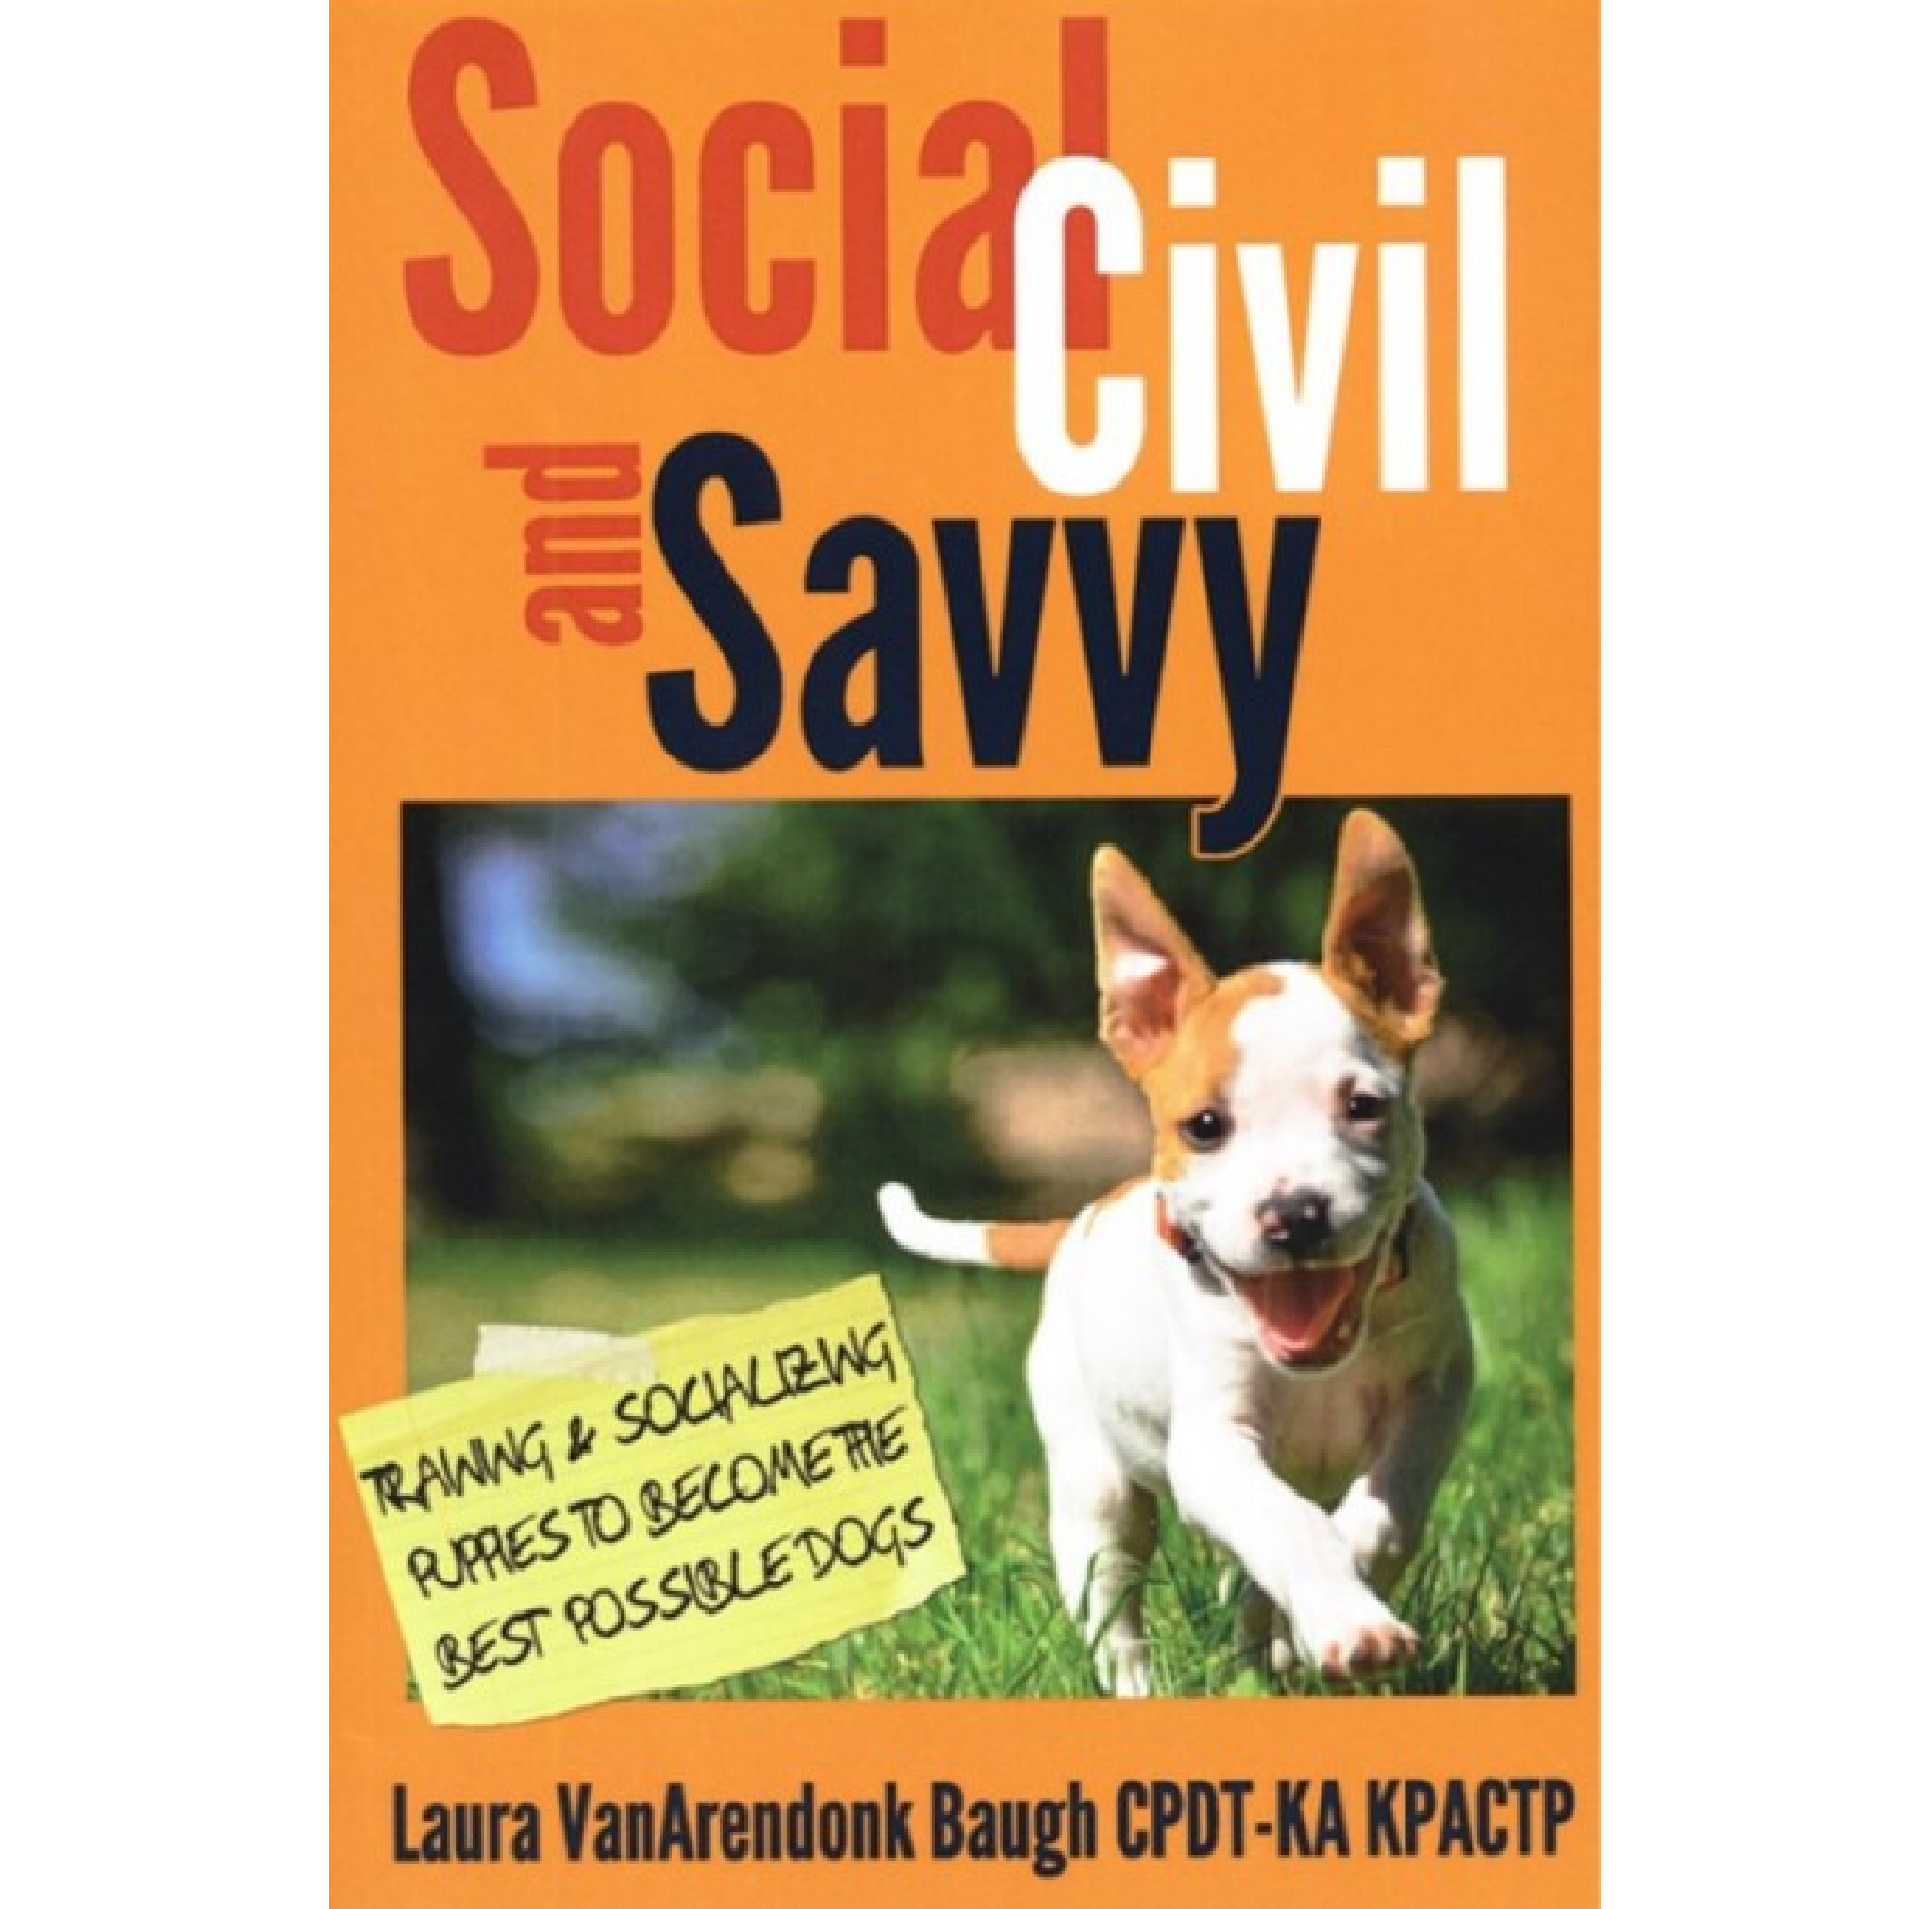 Social, Civil, and Savvy: Training & Socializing Puppies To Become The Best Possible Dogs